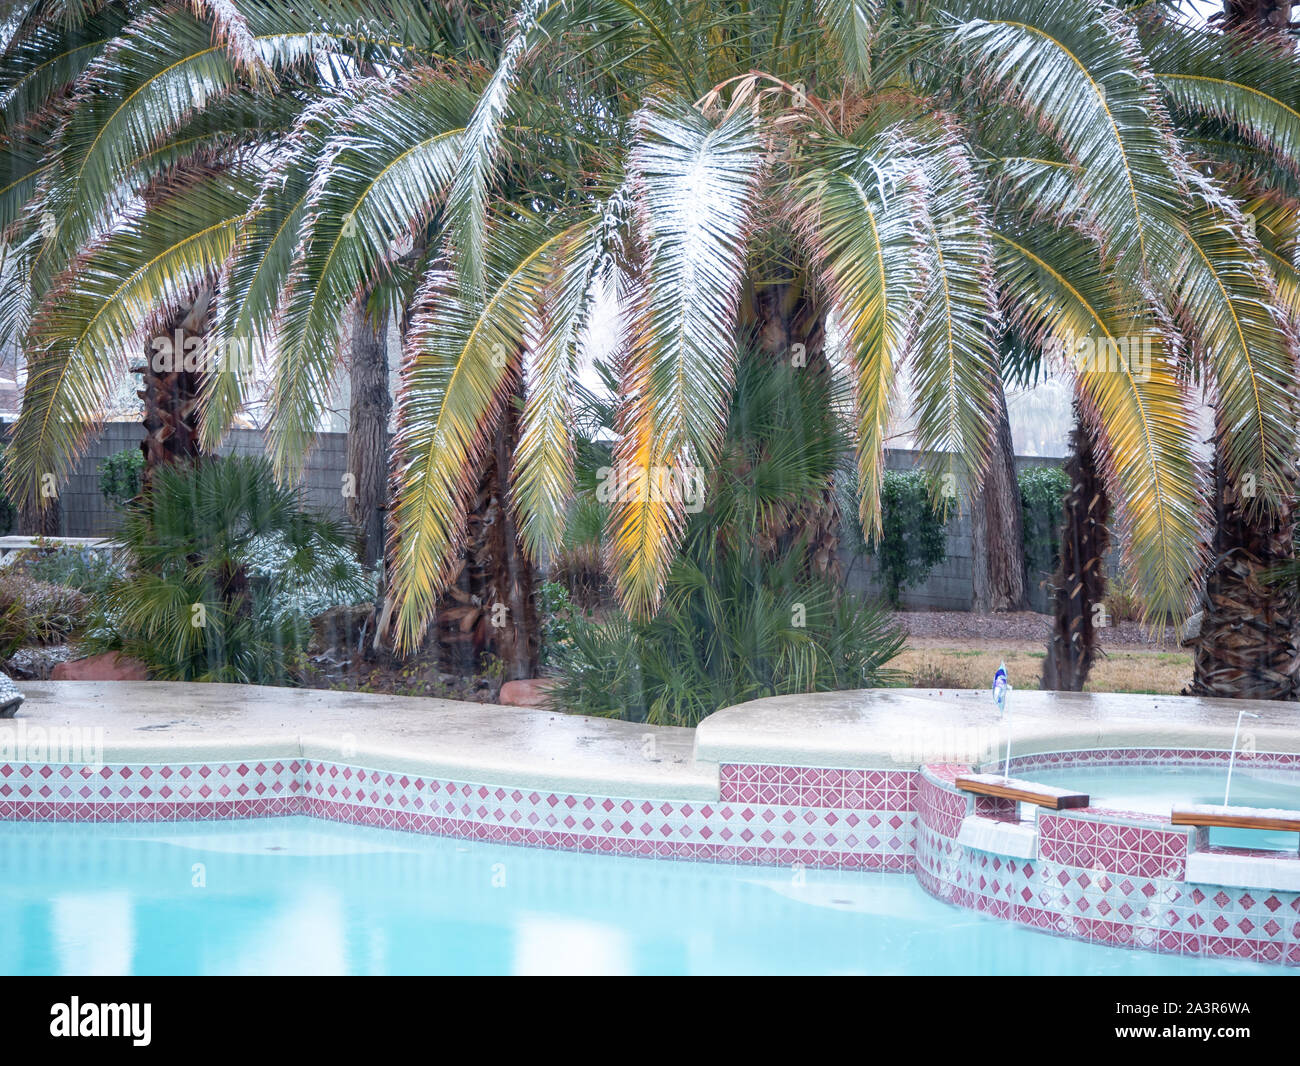 Snow falling on palm trees and swimming pool in Las Vegas, Nevada, USA Stock Photo